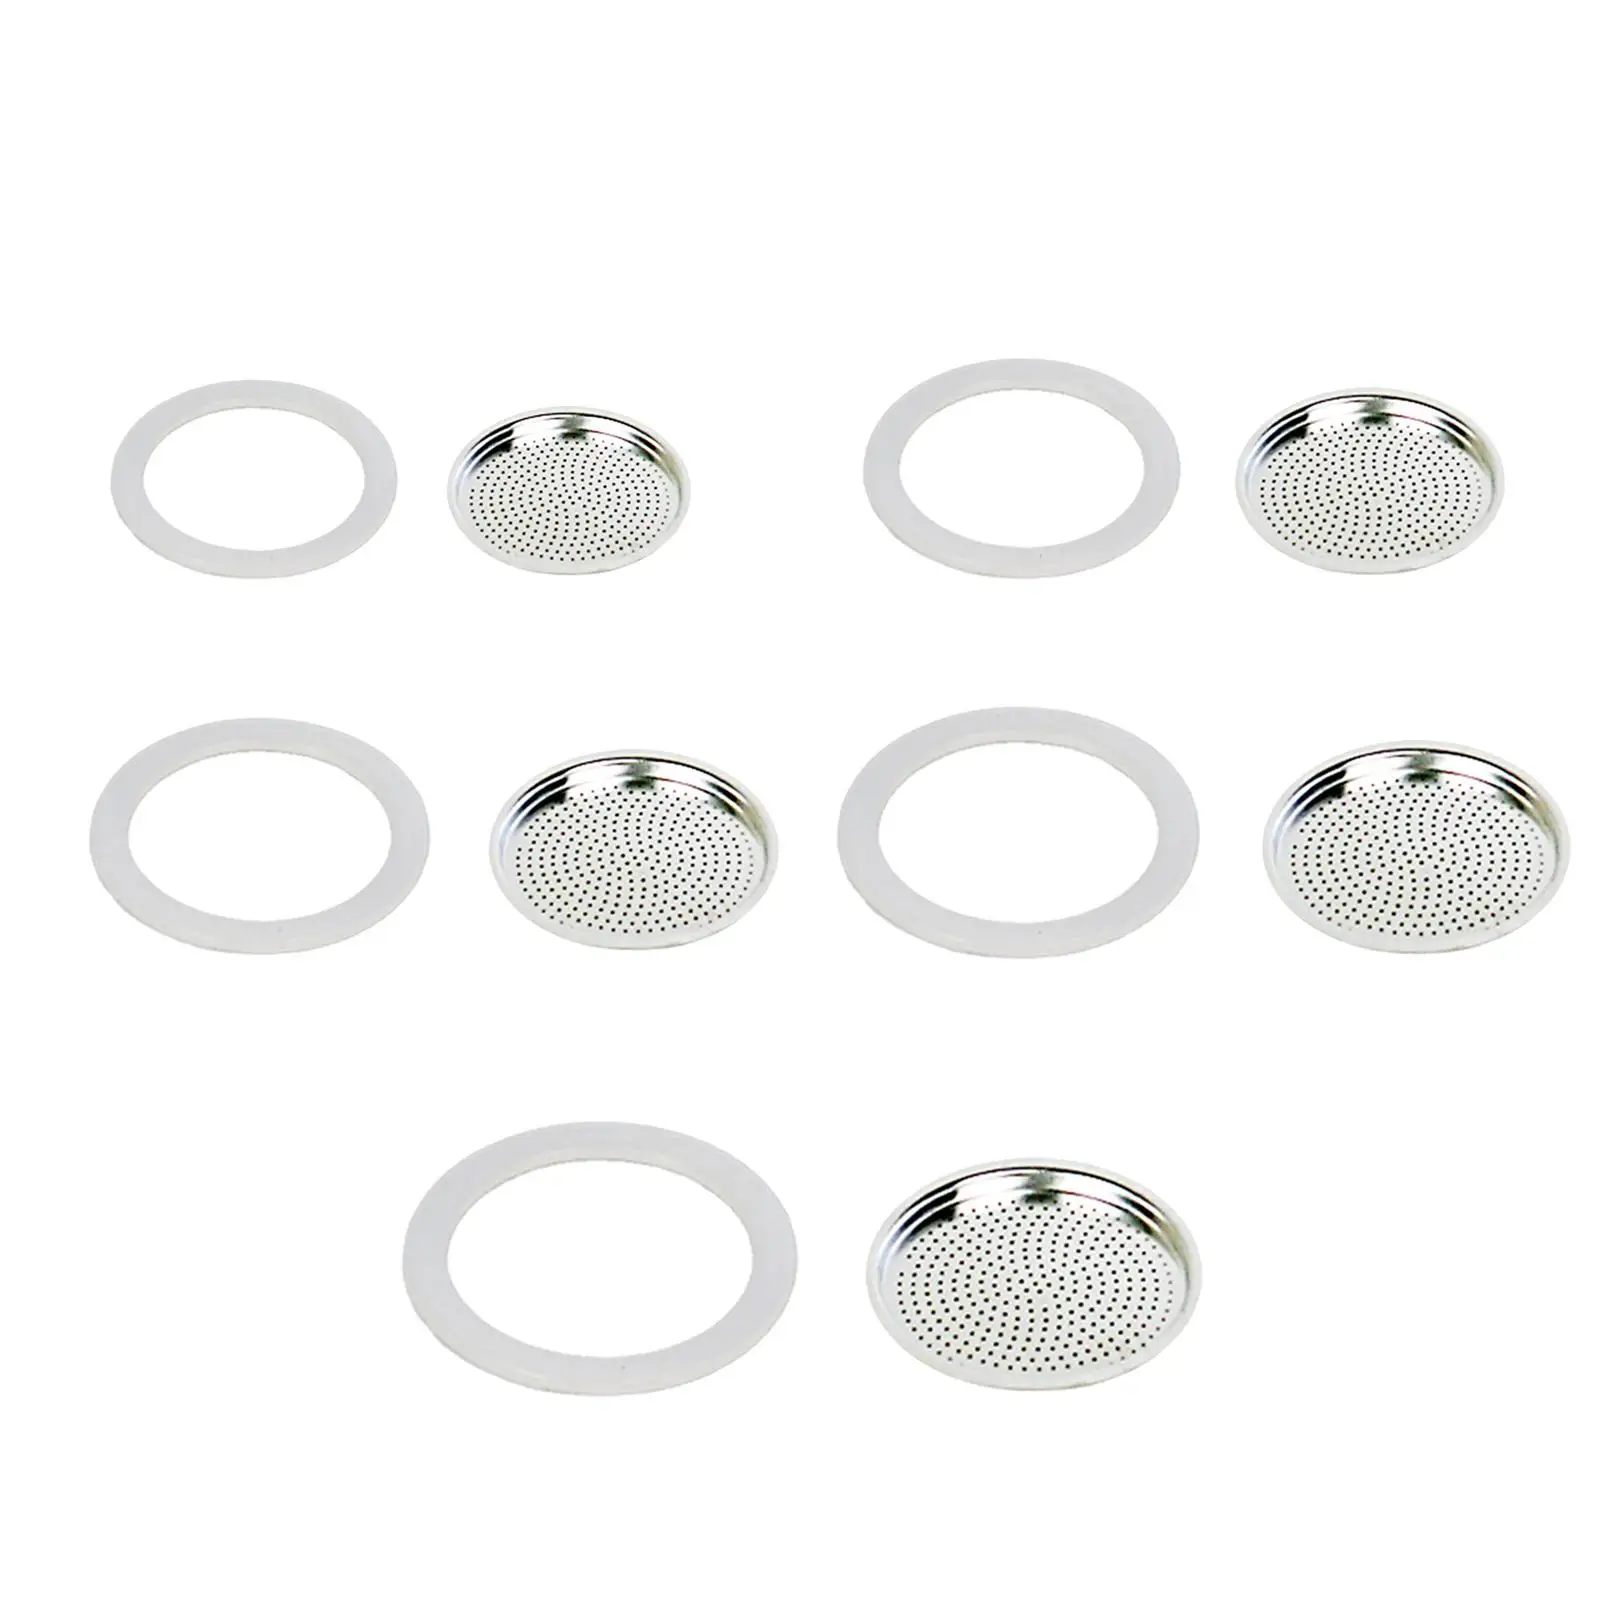 Gasket Seal Rings with Aluminum Filter, Flexible Washer Gasket, Portable Accessory Replacements for Moka Pot, Coffee Maker